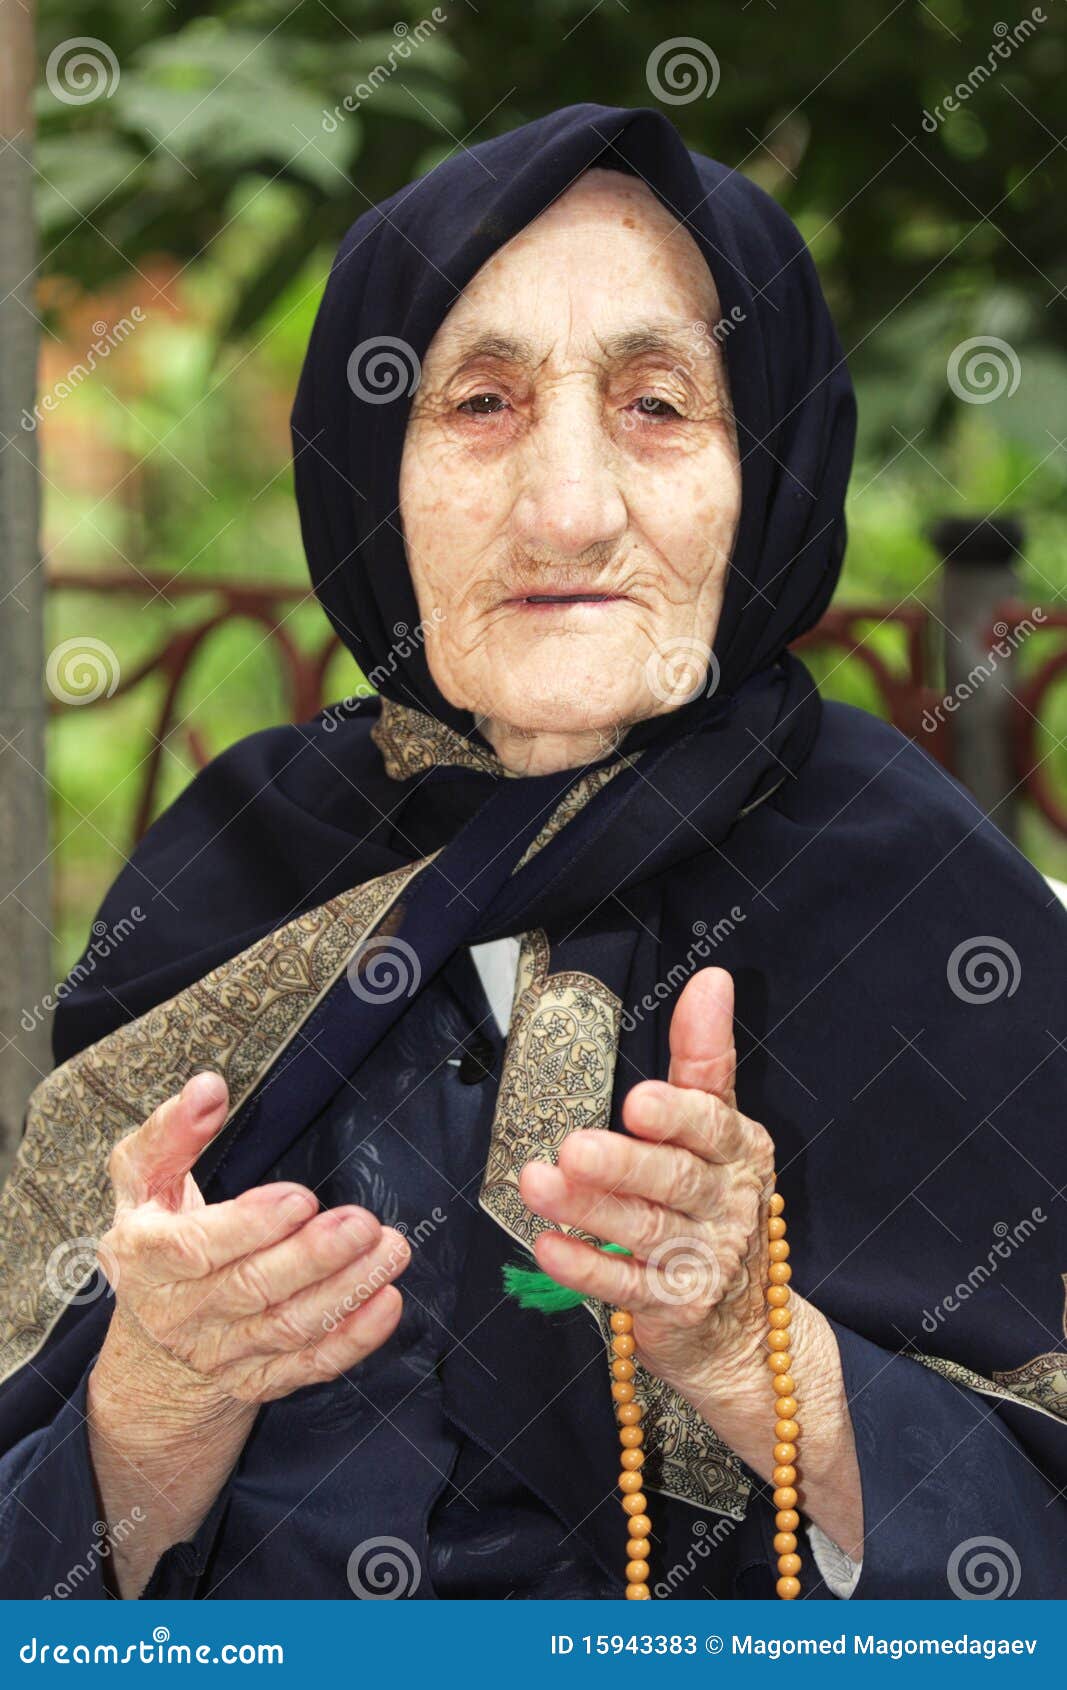 elderly woman with beads gesticulating